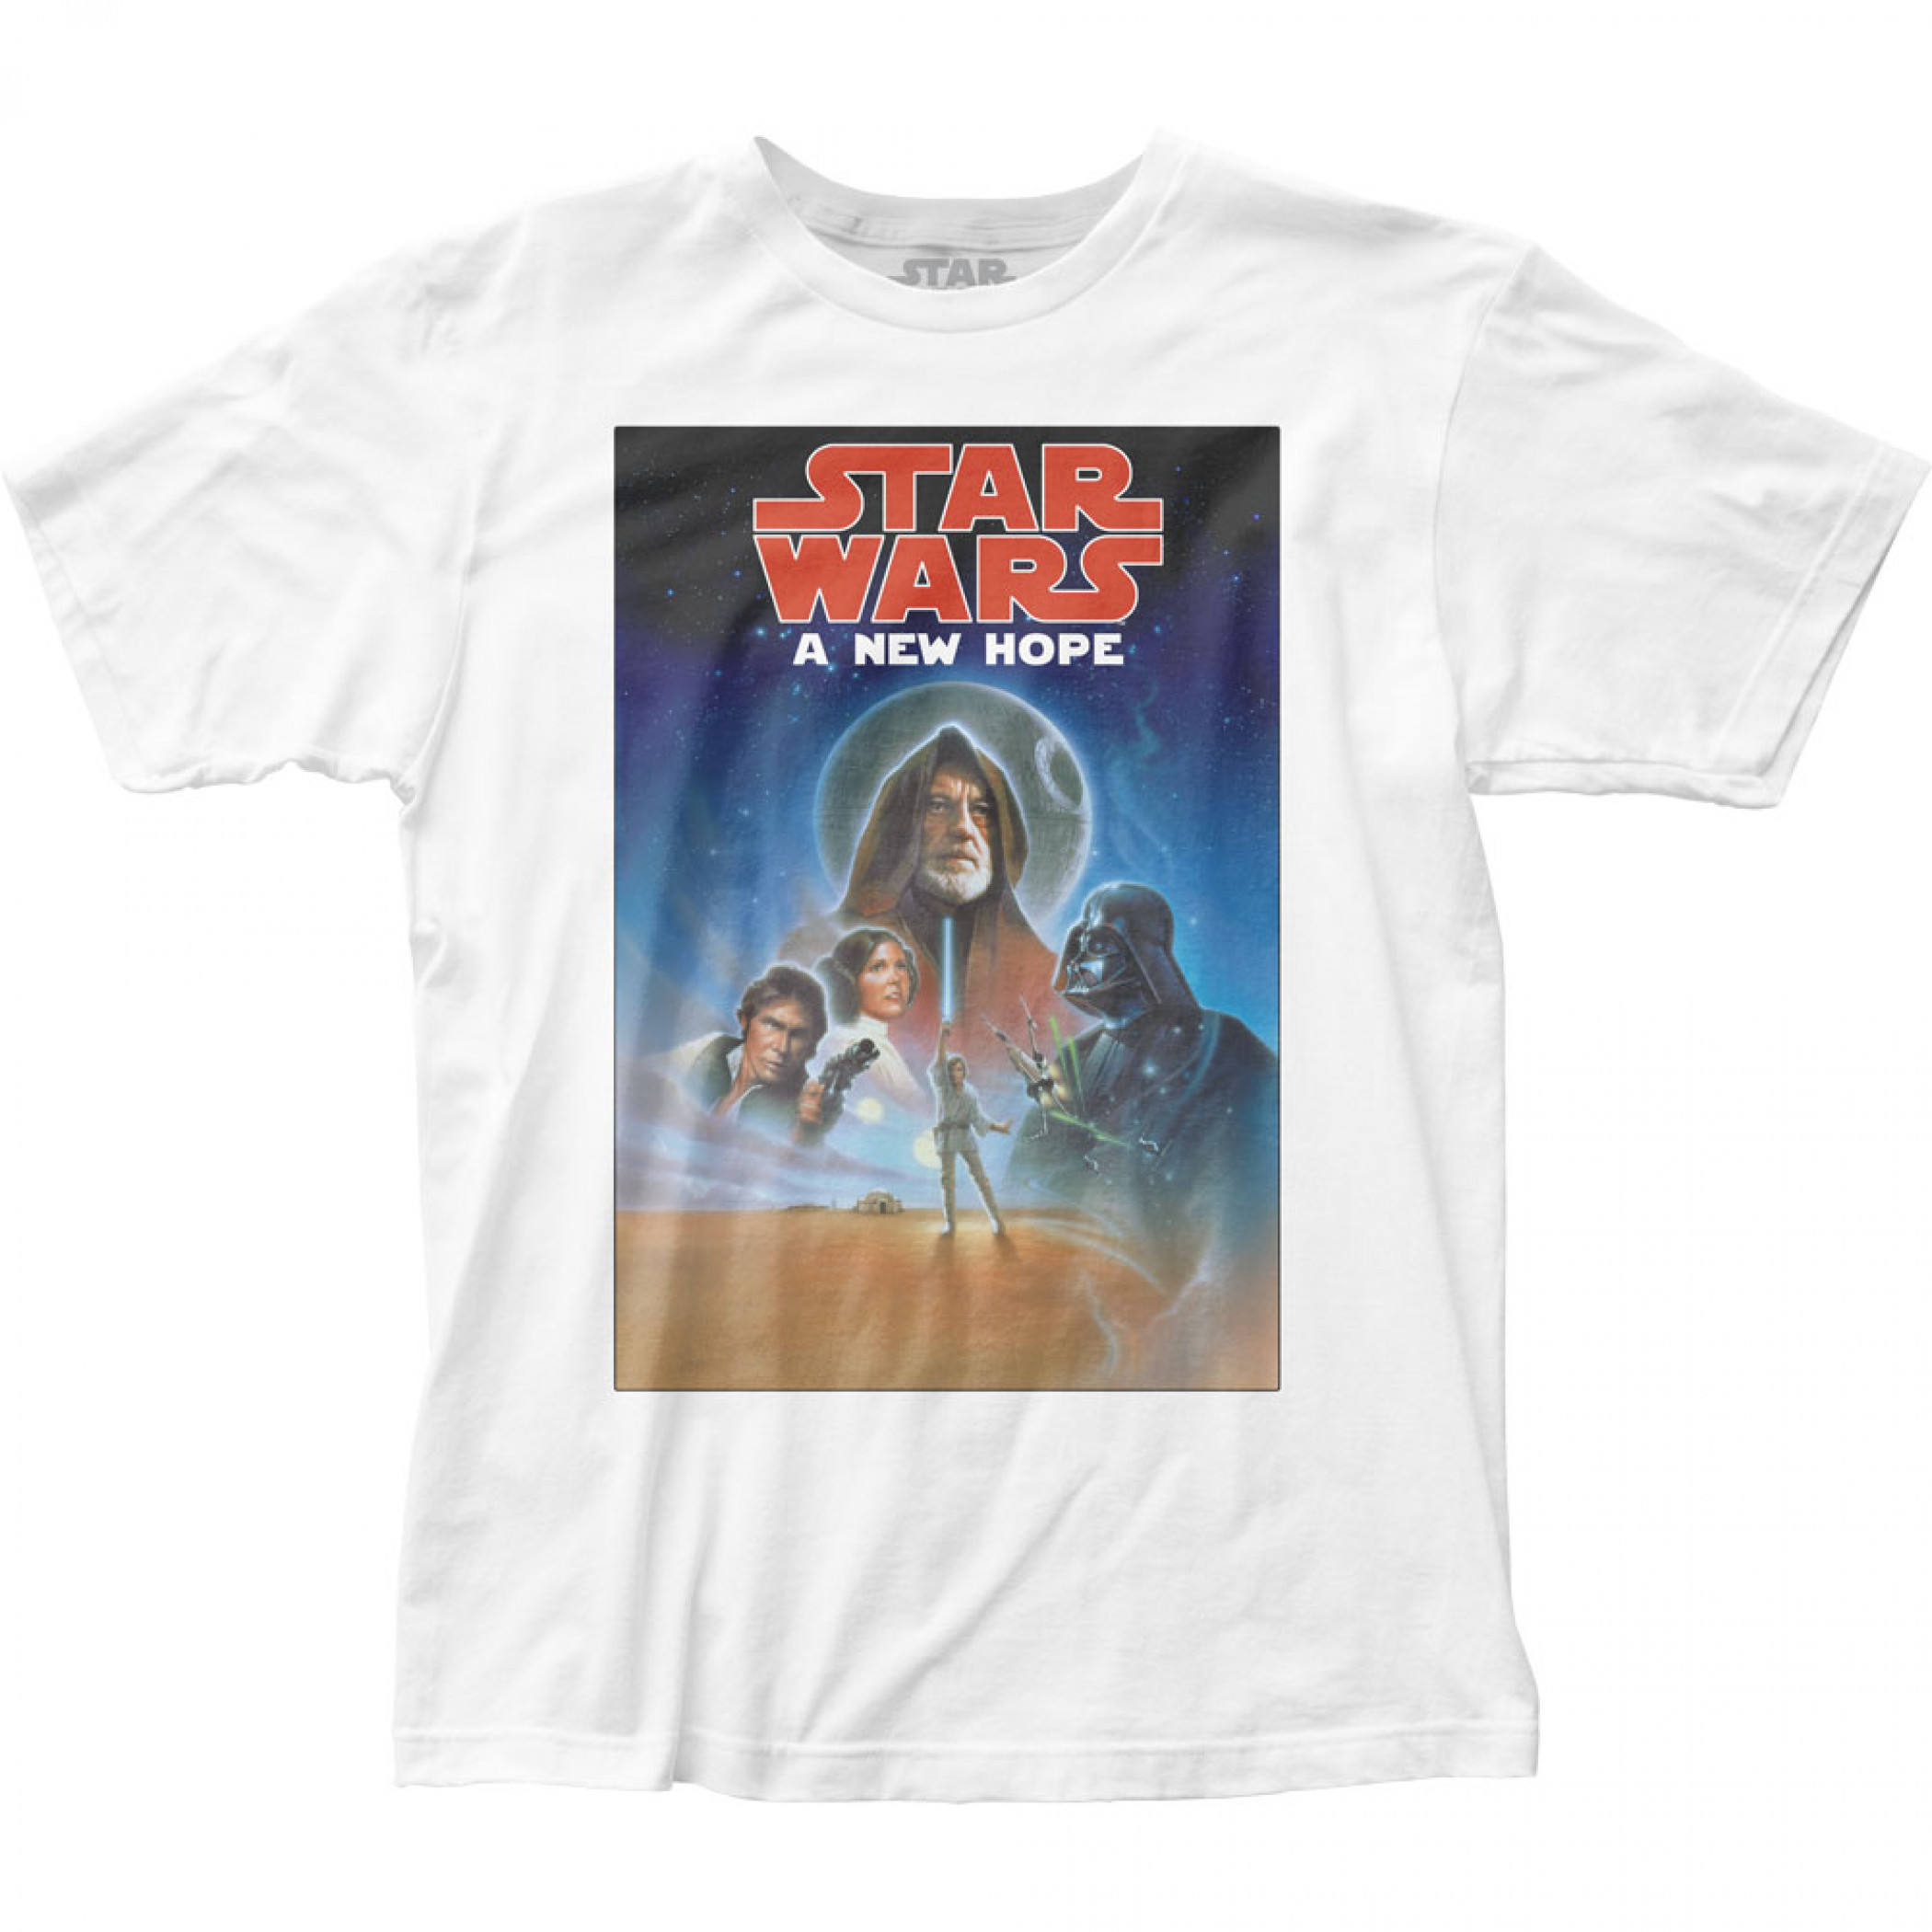 Official Star Wars A New Hope T-Shirt Darth Vader Storm Trooper Movie Merch 